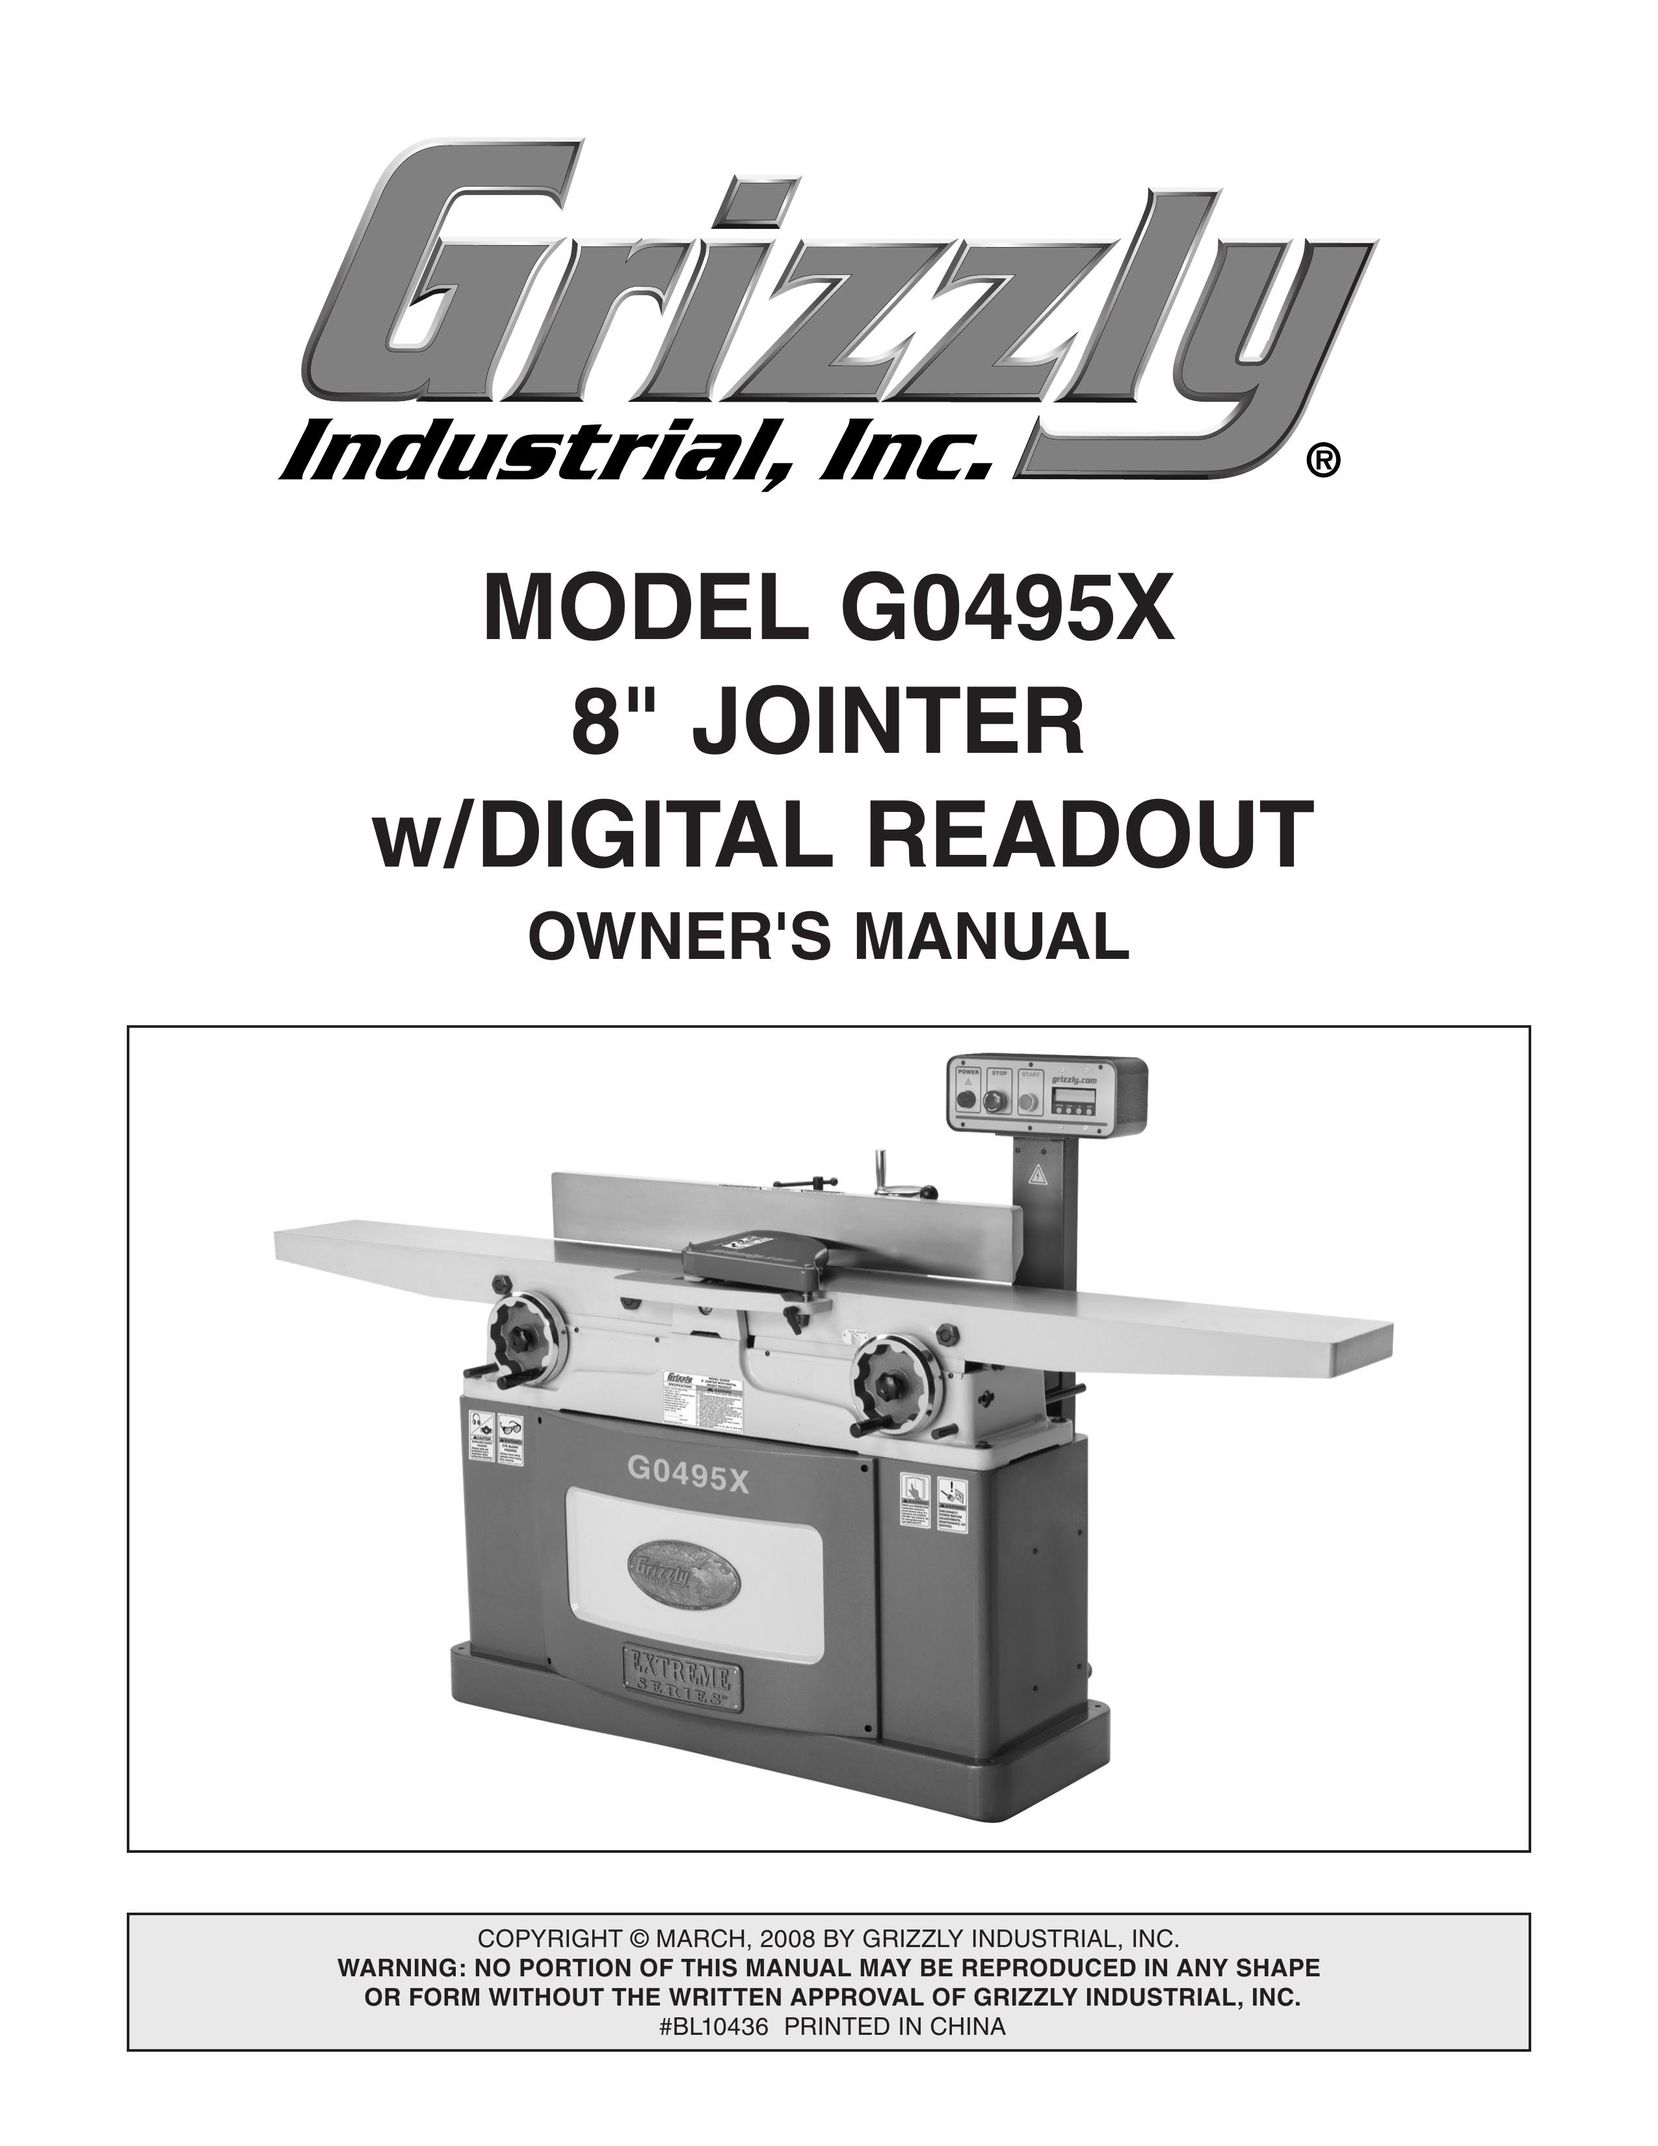 Grizzly G0495X Saw User Manual